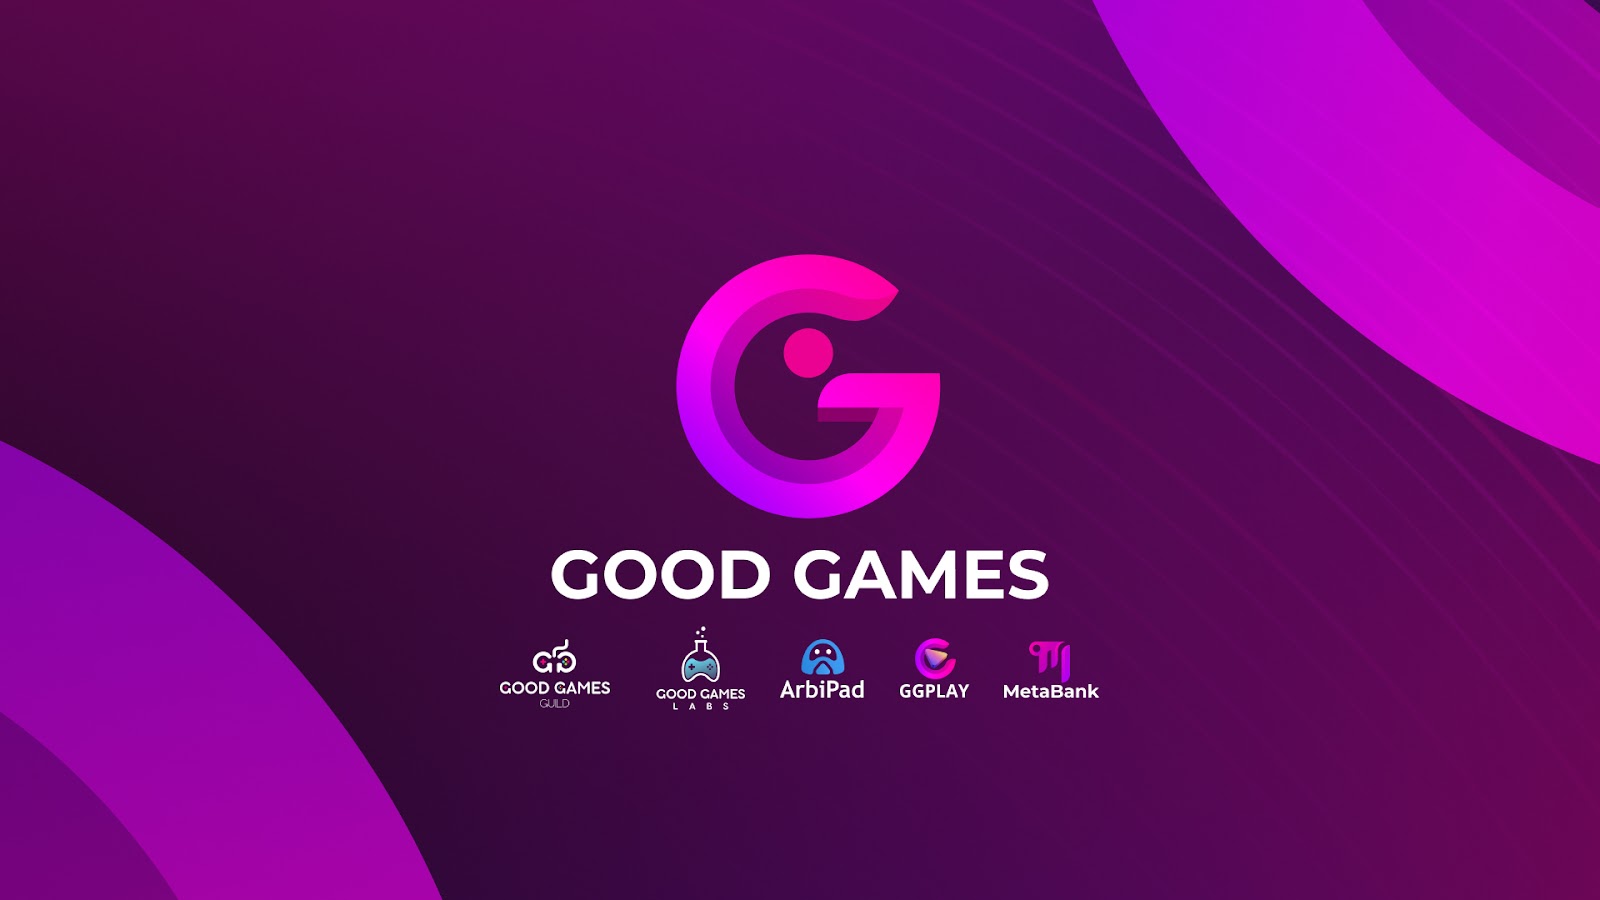 Good Games: Empower and Accelerate Potential of WEB3 Industry - Good Games  Guild